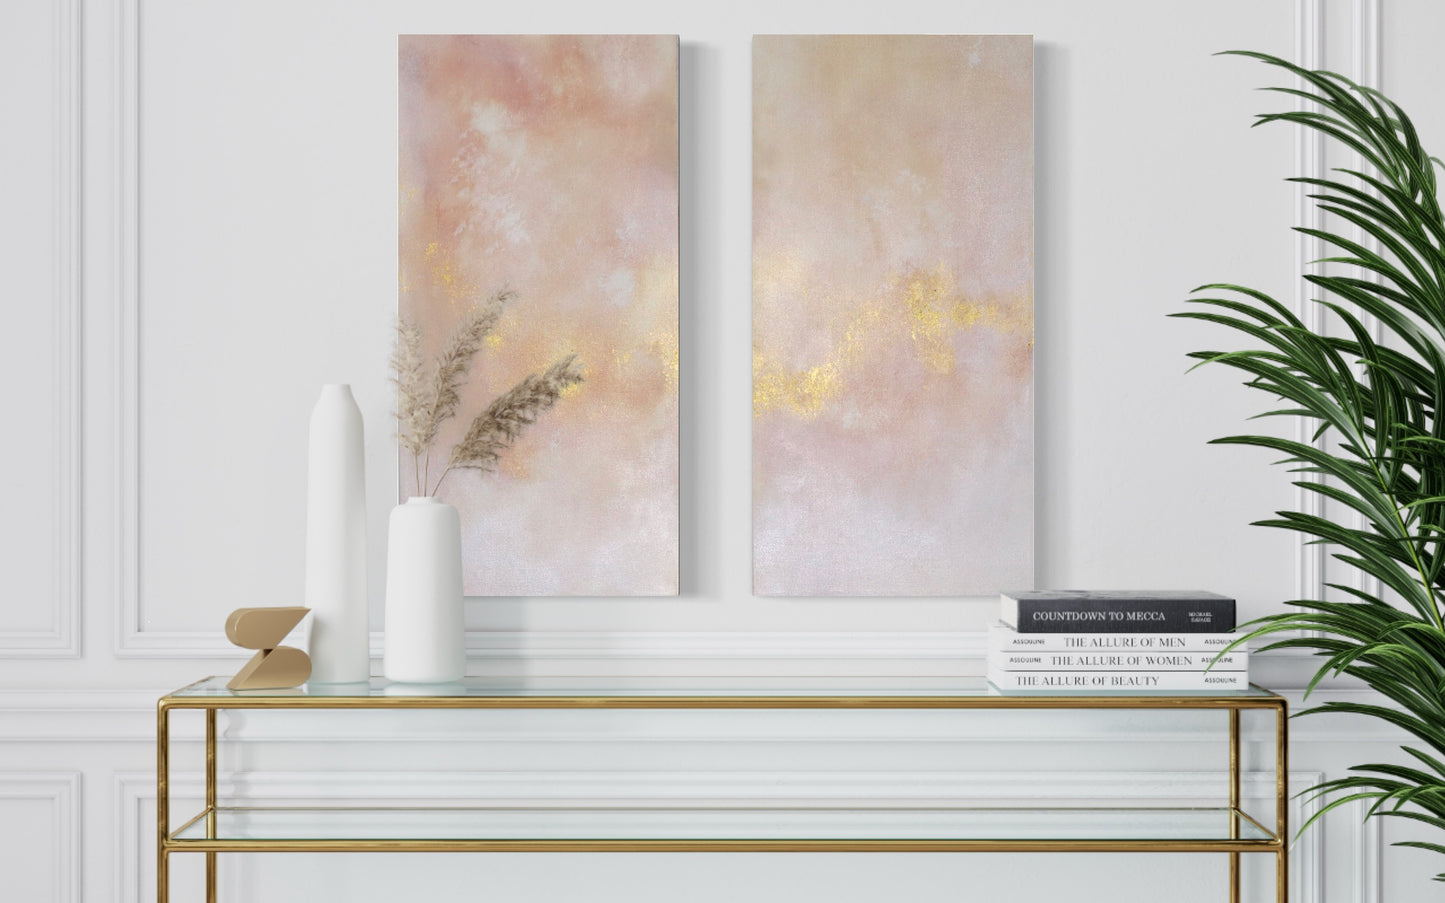 non representational artist, abstract artist, black female artist, home decor, mixed media, gold leaf, peach and white acrylic paint,